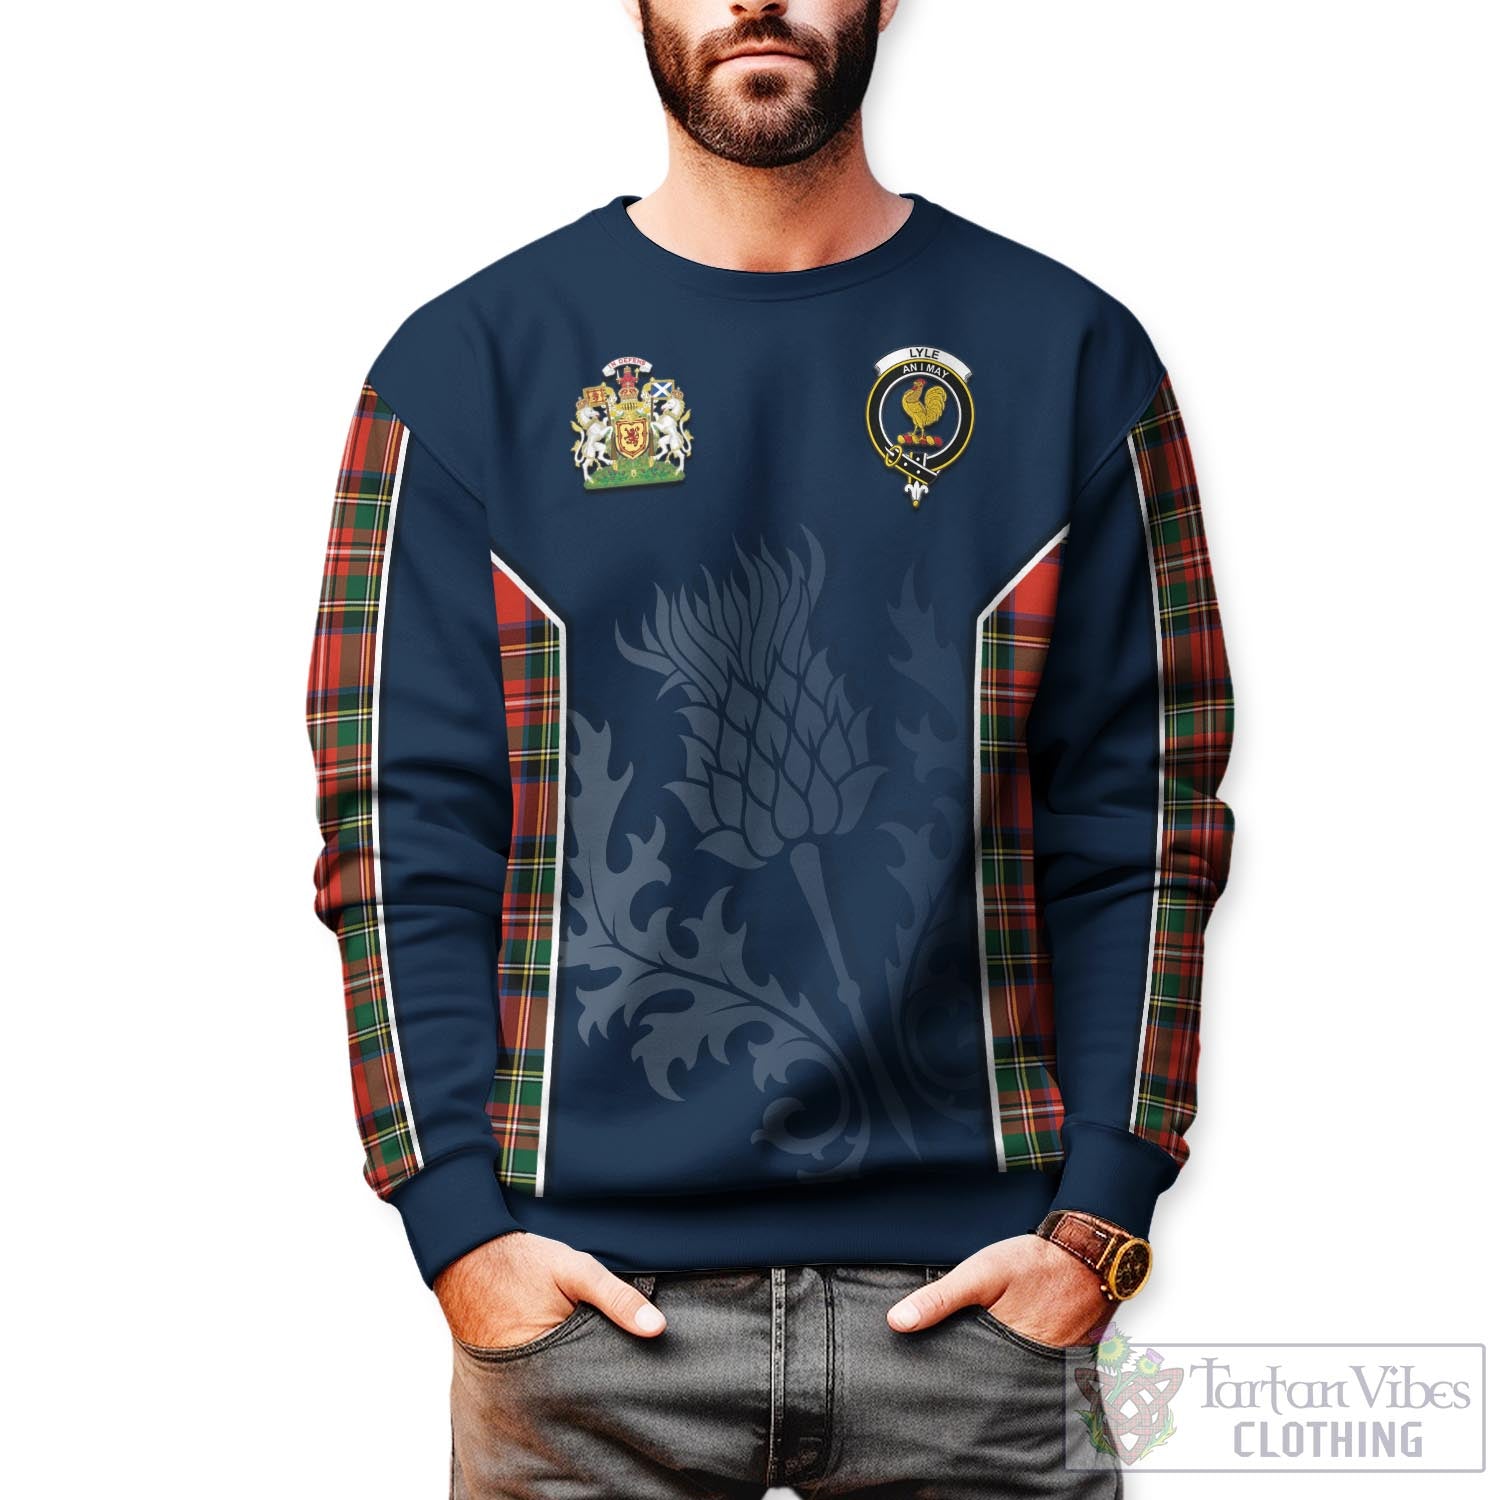 Tartan Vibes Clothing Lyle Tartan Sweatshirt with Family Crest and Scottish Thistle Vibes Sport Style